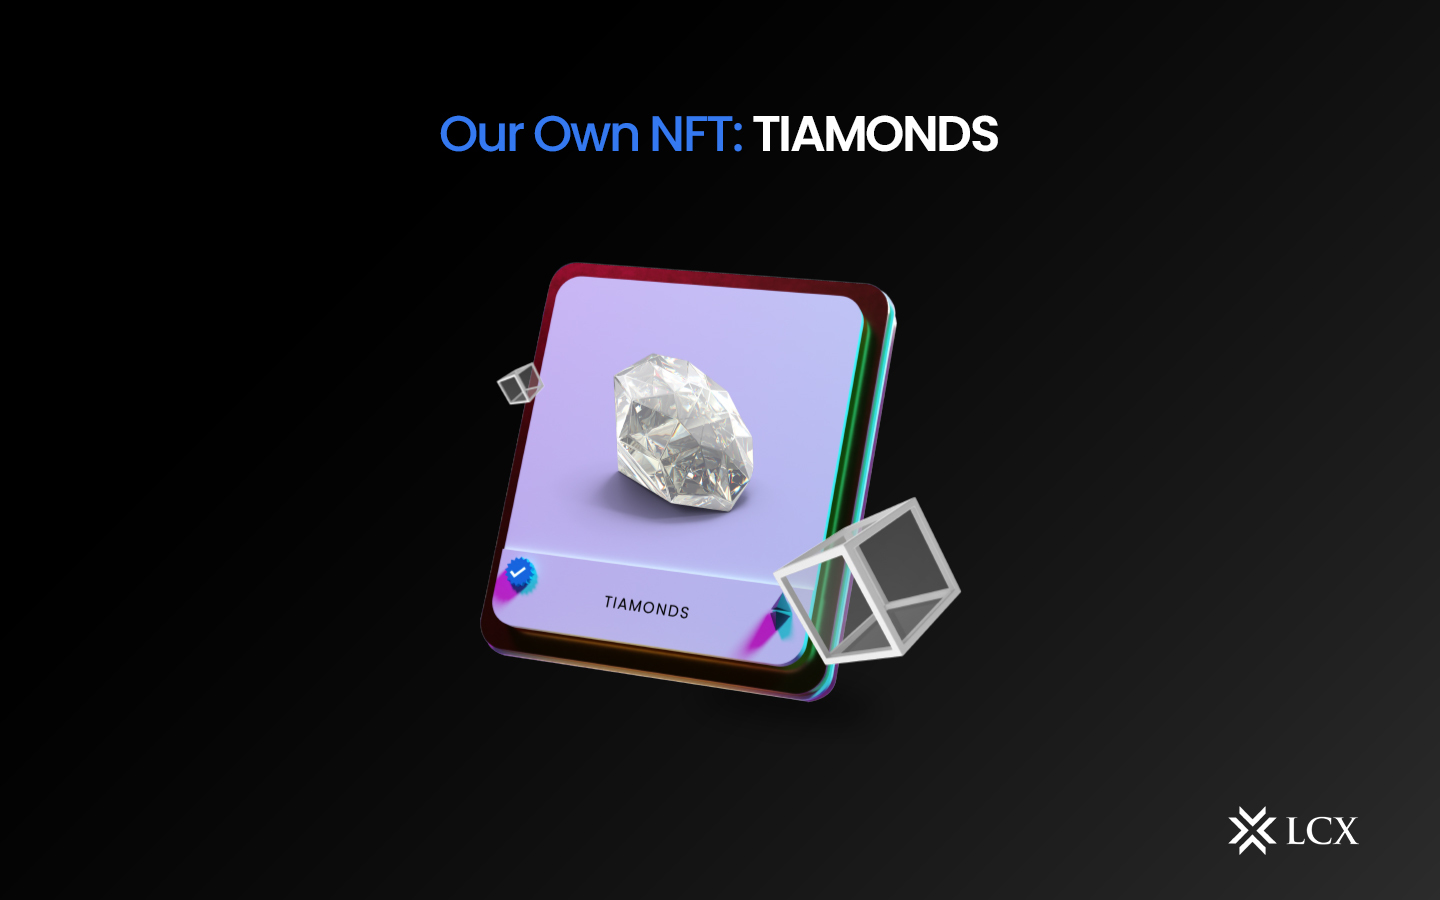 Our own NFT: TIAMONDS – LCX